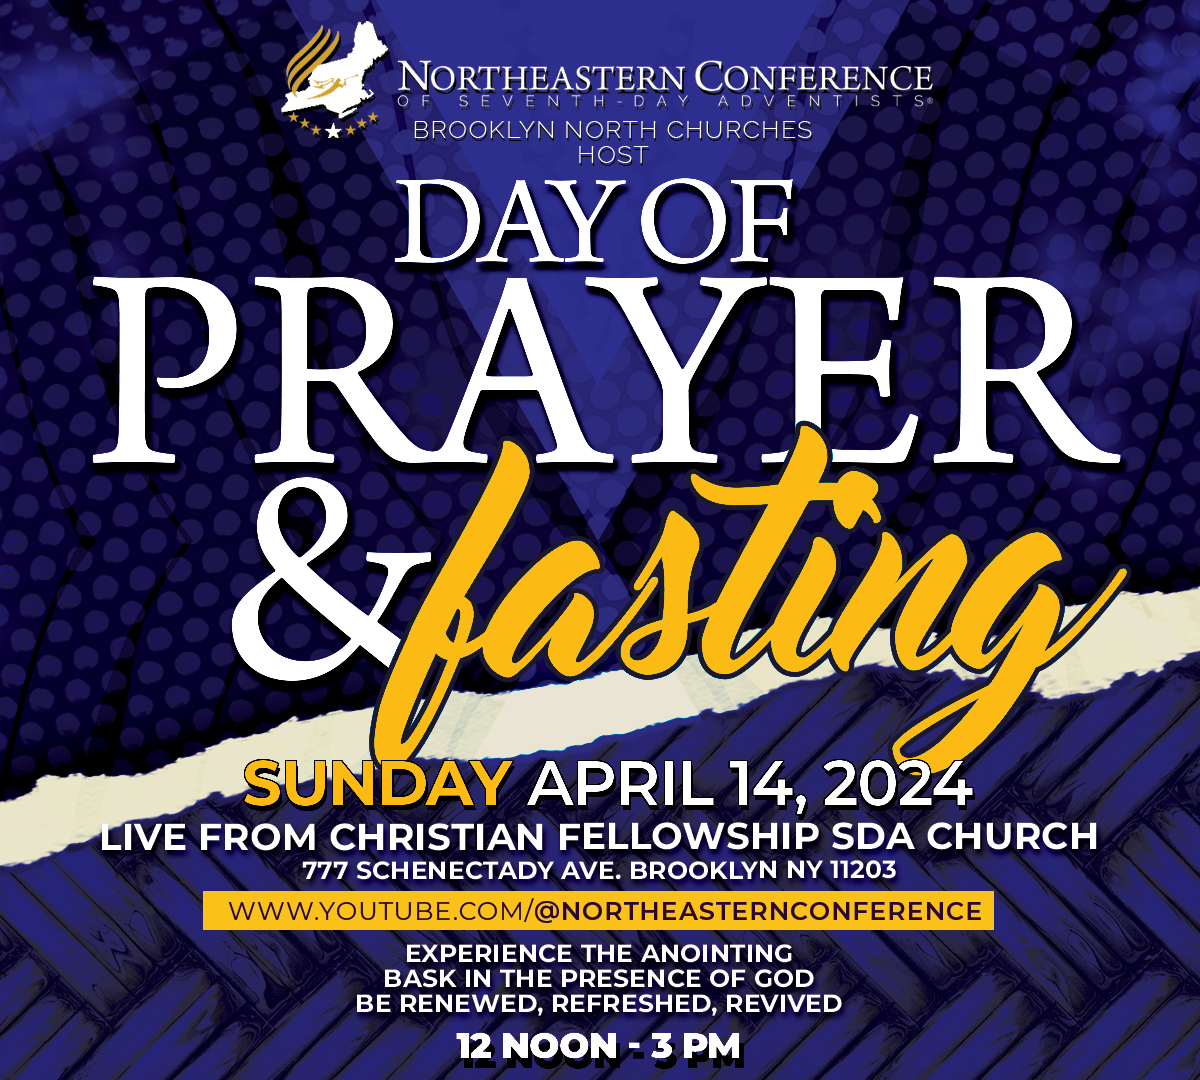 Day of Prayer & Fasting Service IN PERSON at Christian Fellowship